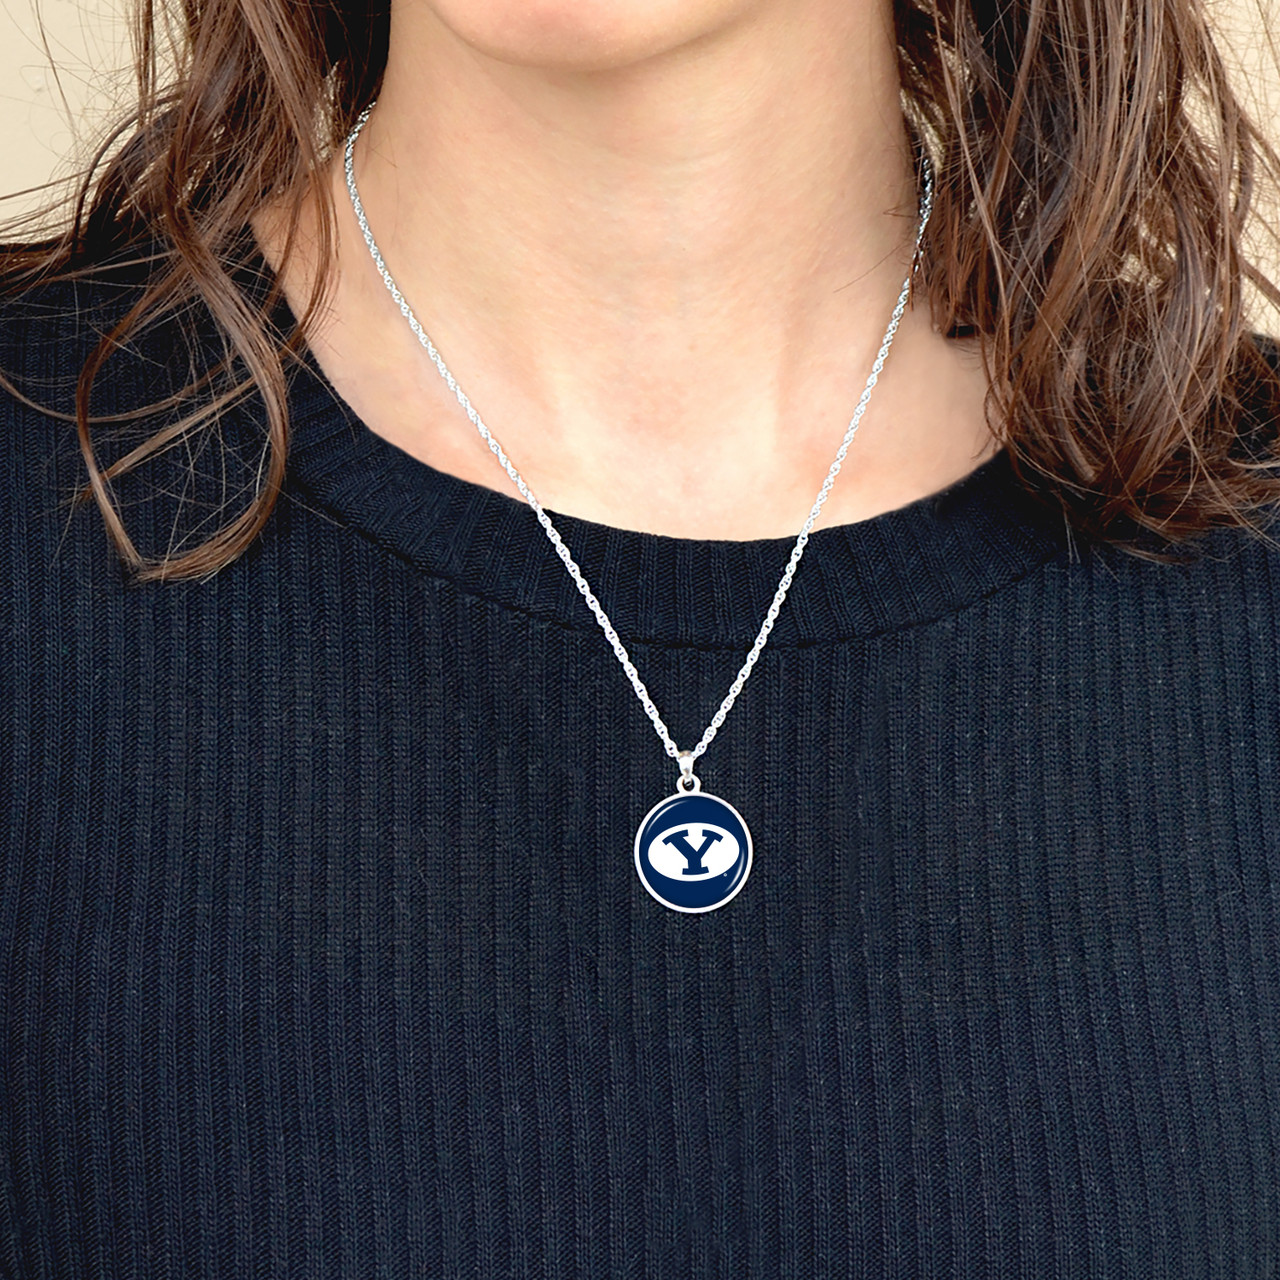 BYU Cougars Necklace- Leah